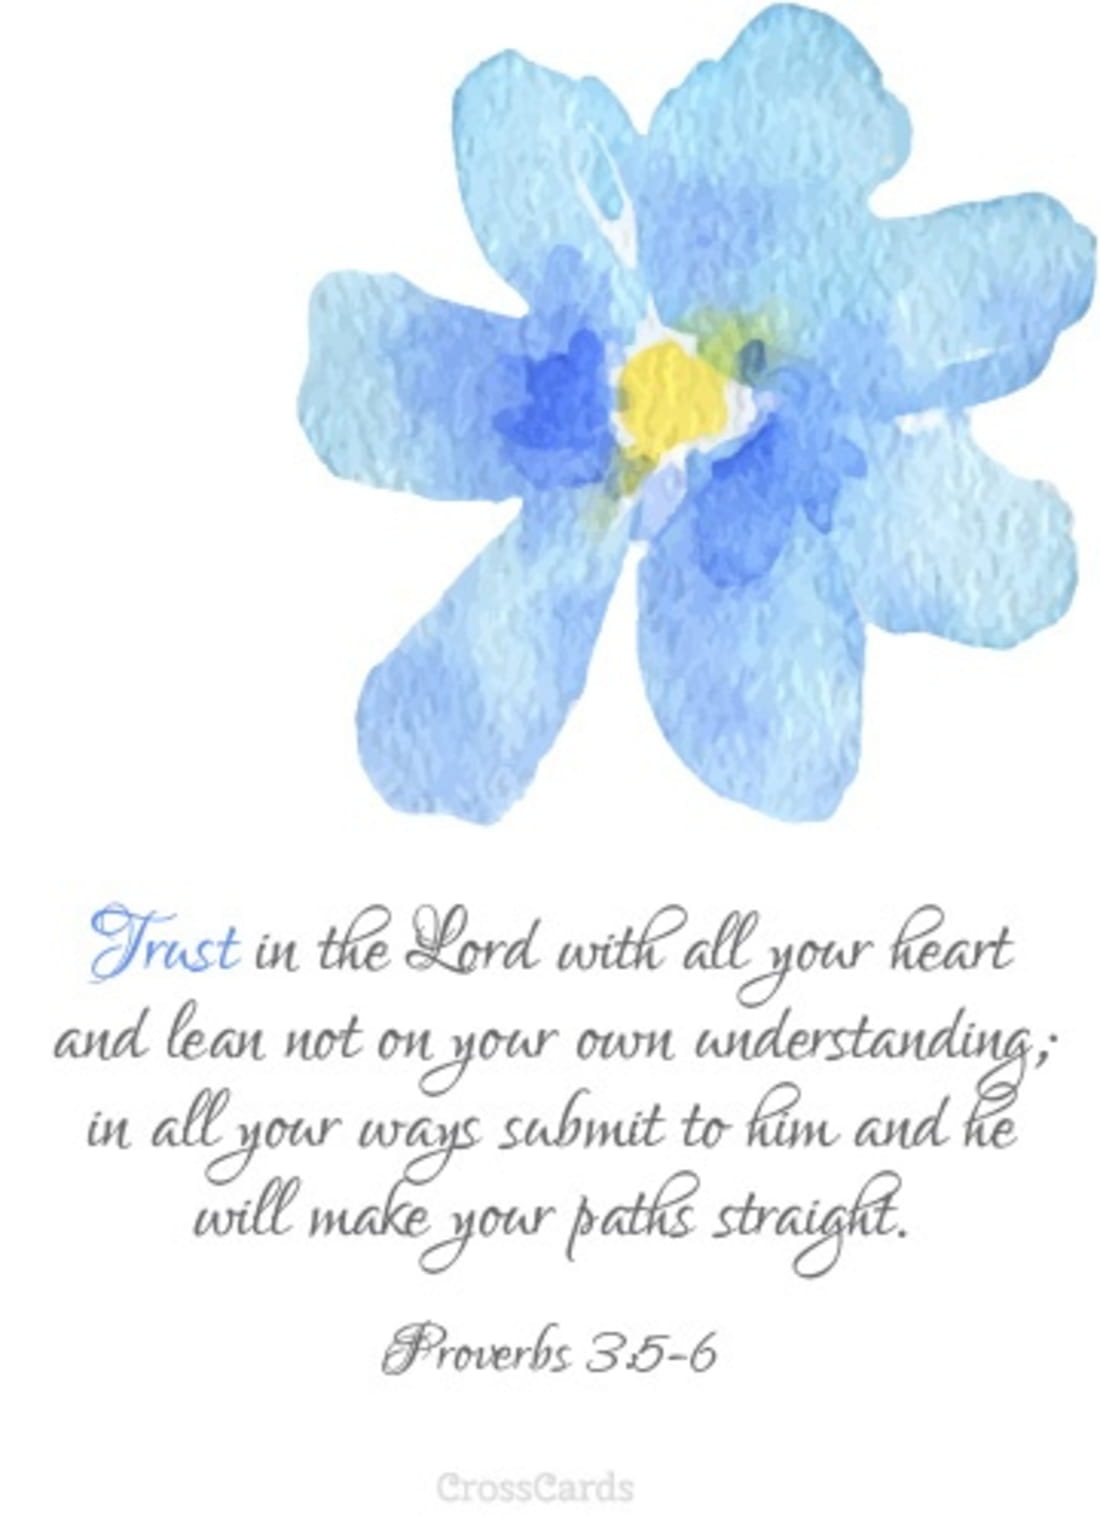 Trust in the Lord with All Your Heart - Printable